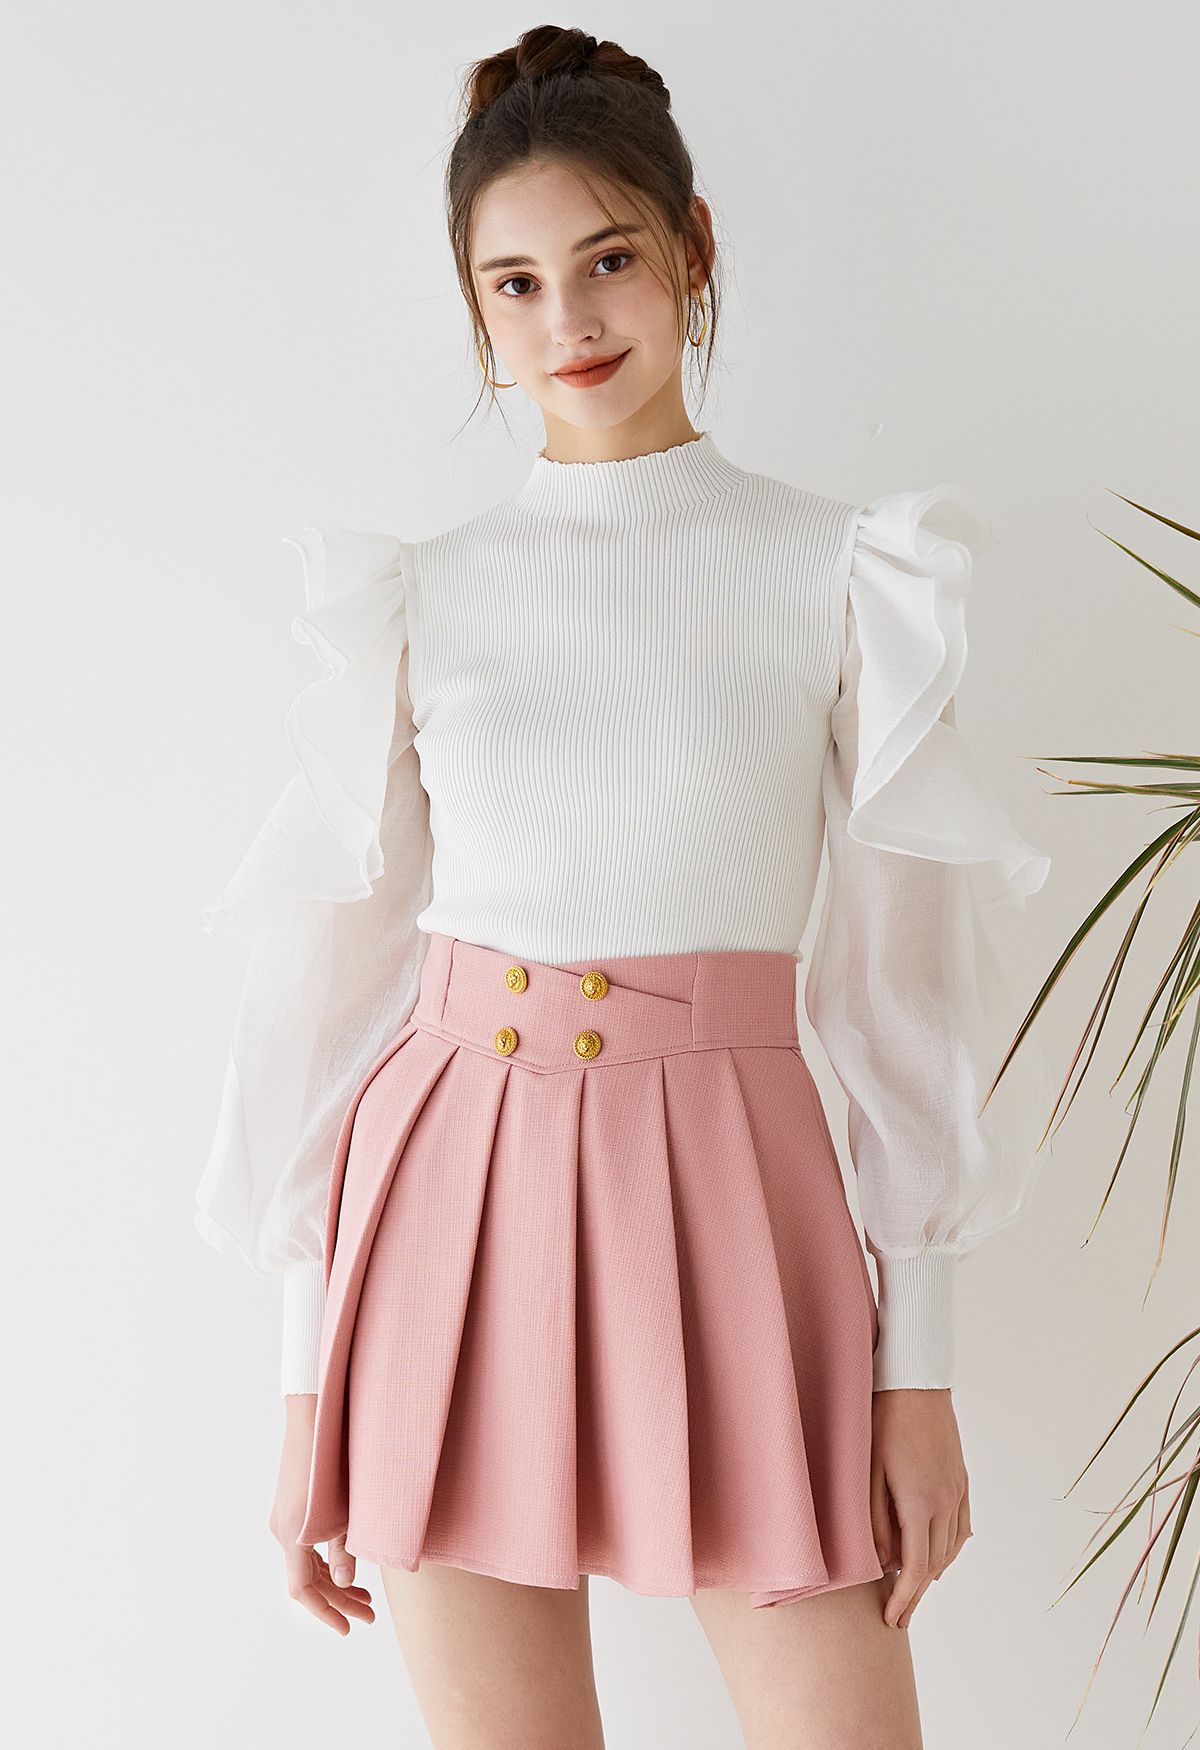 Tiered Ruffle Sleeves Spliced Knit Top in White